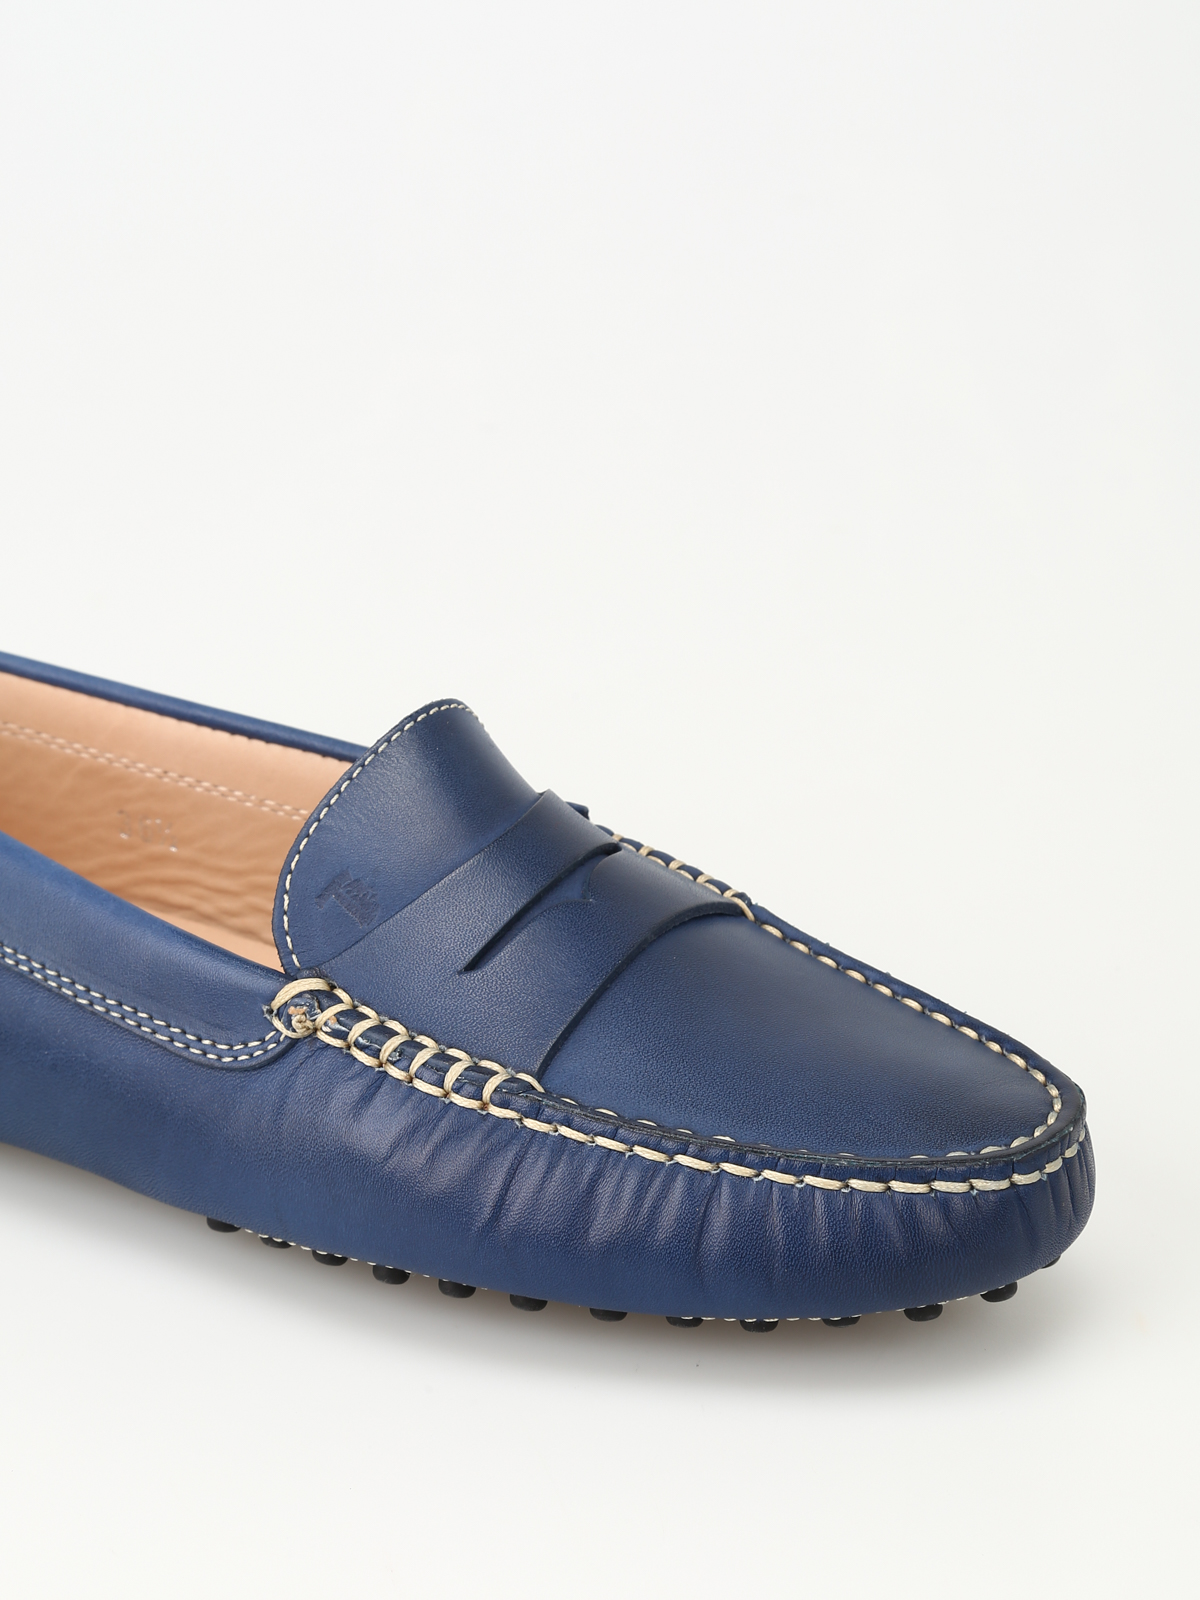 blue leather driving shoes